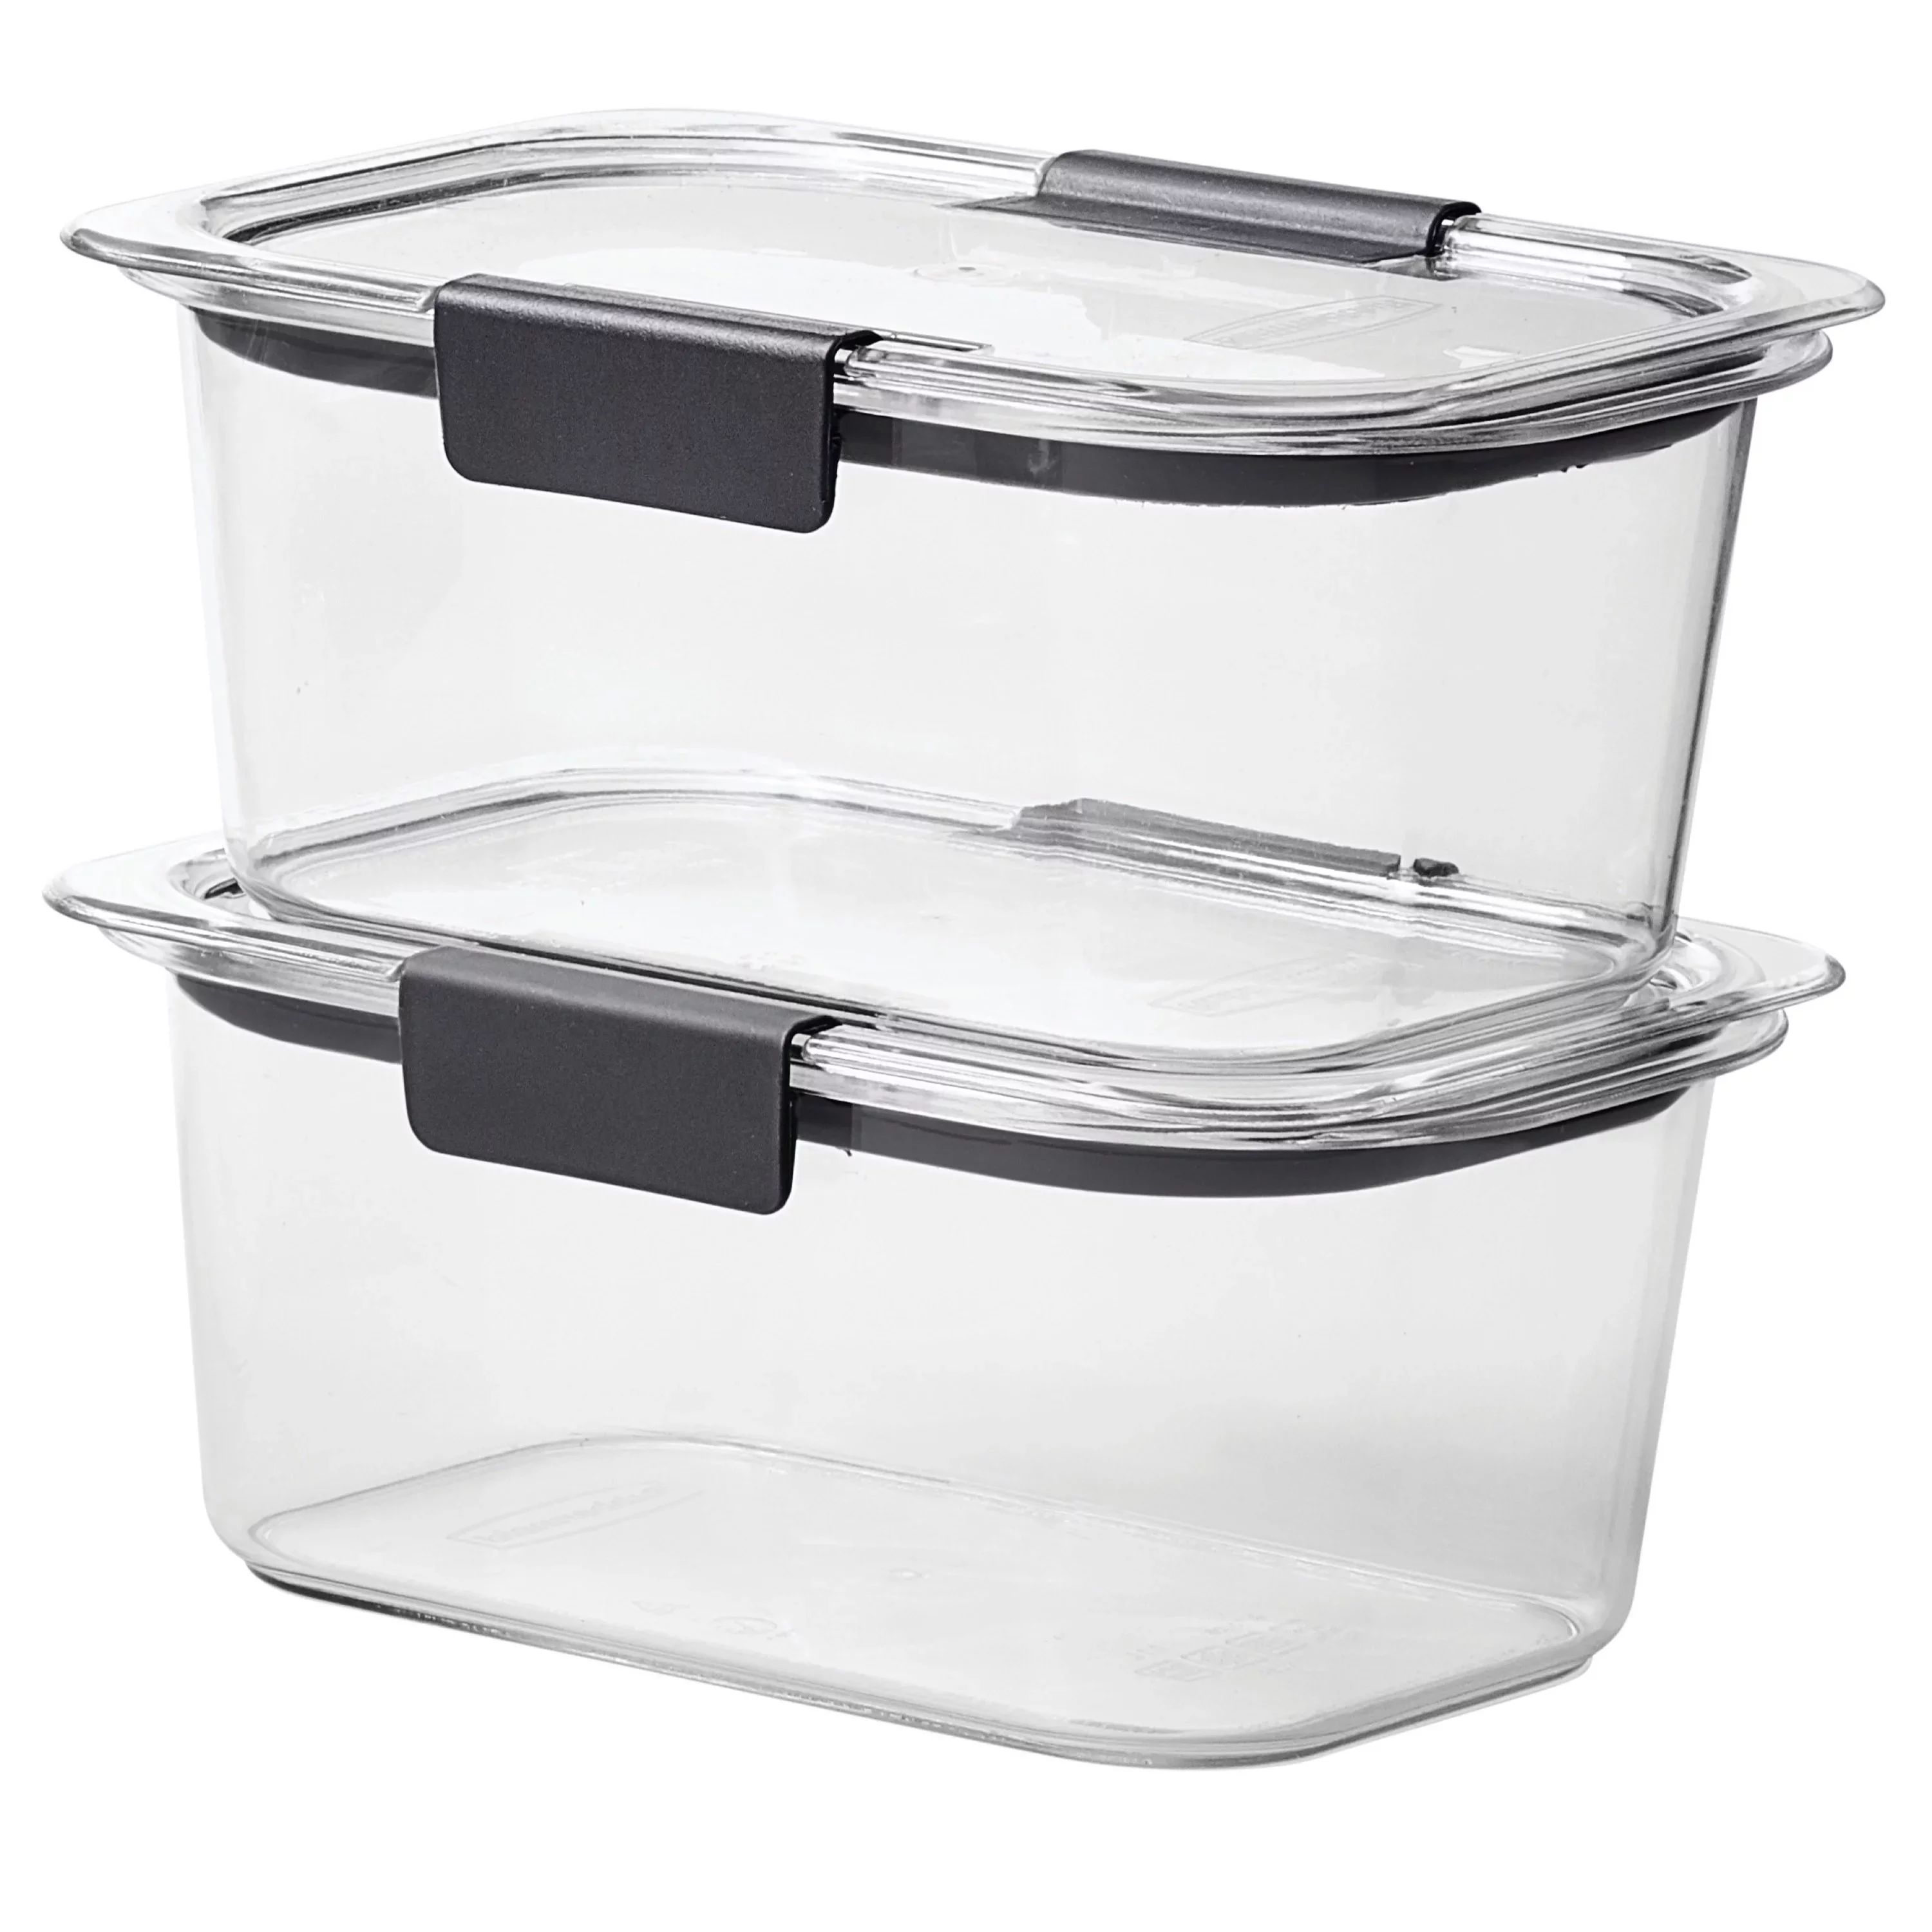 Rubbermaid Brilliance 4.7 Cup Medium Stain-Proof Food Storage Container, Set of 2 | Walmart (US)